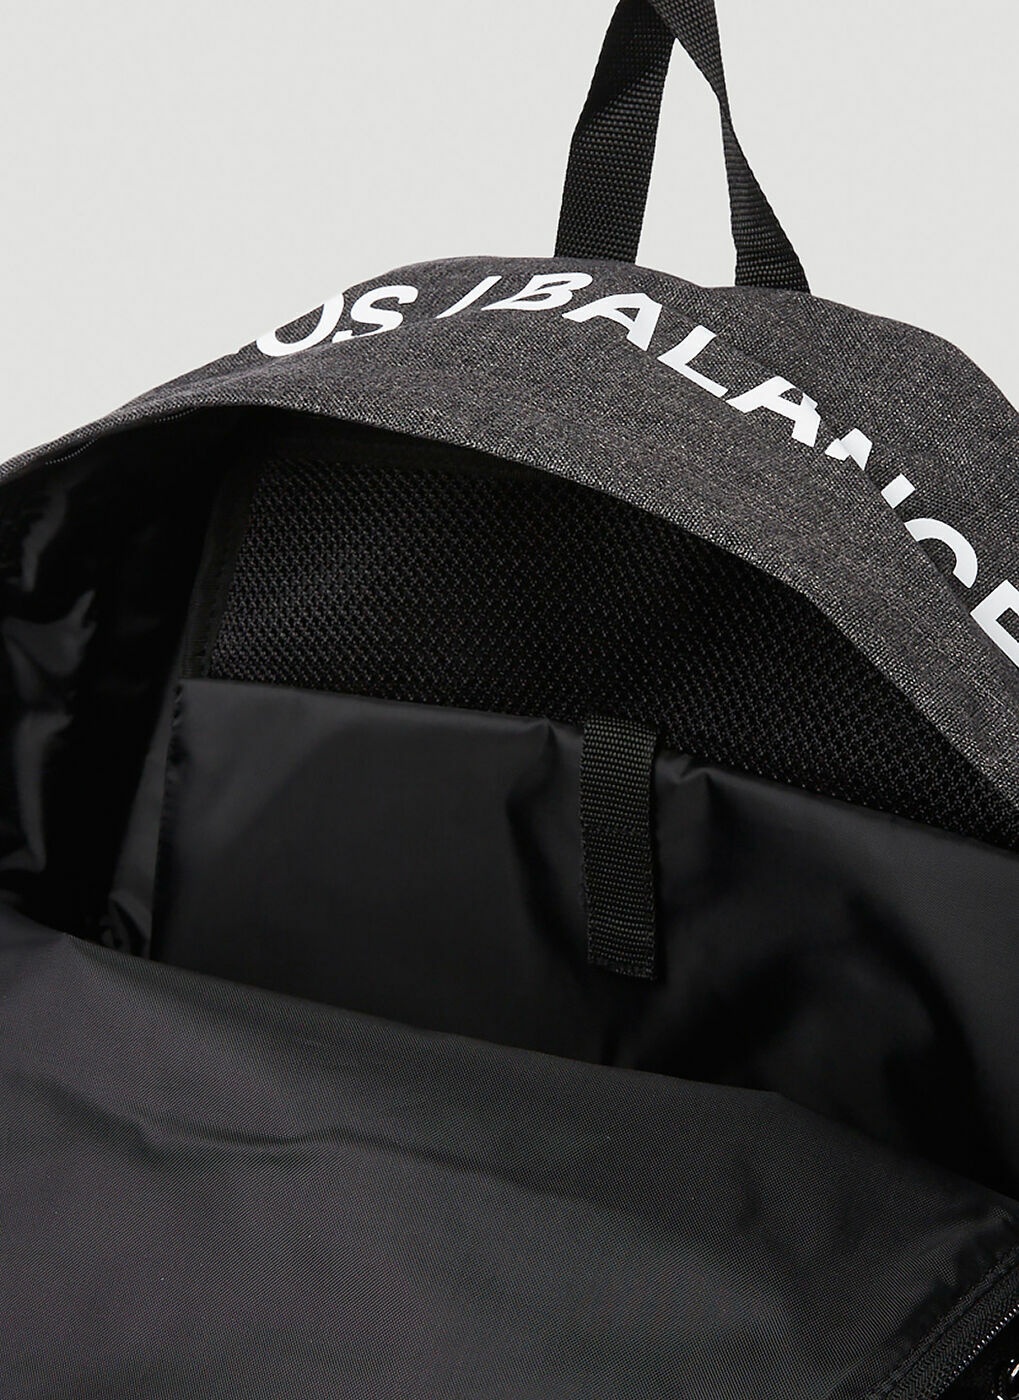 Chaos Balance Backpack in Grey Undercover